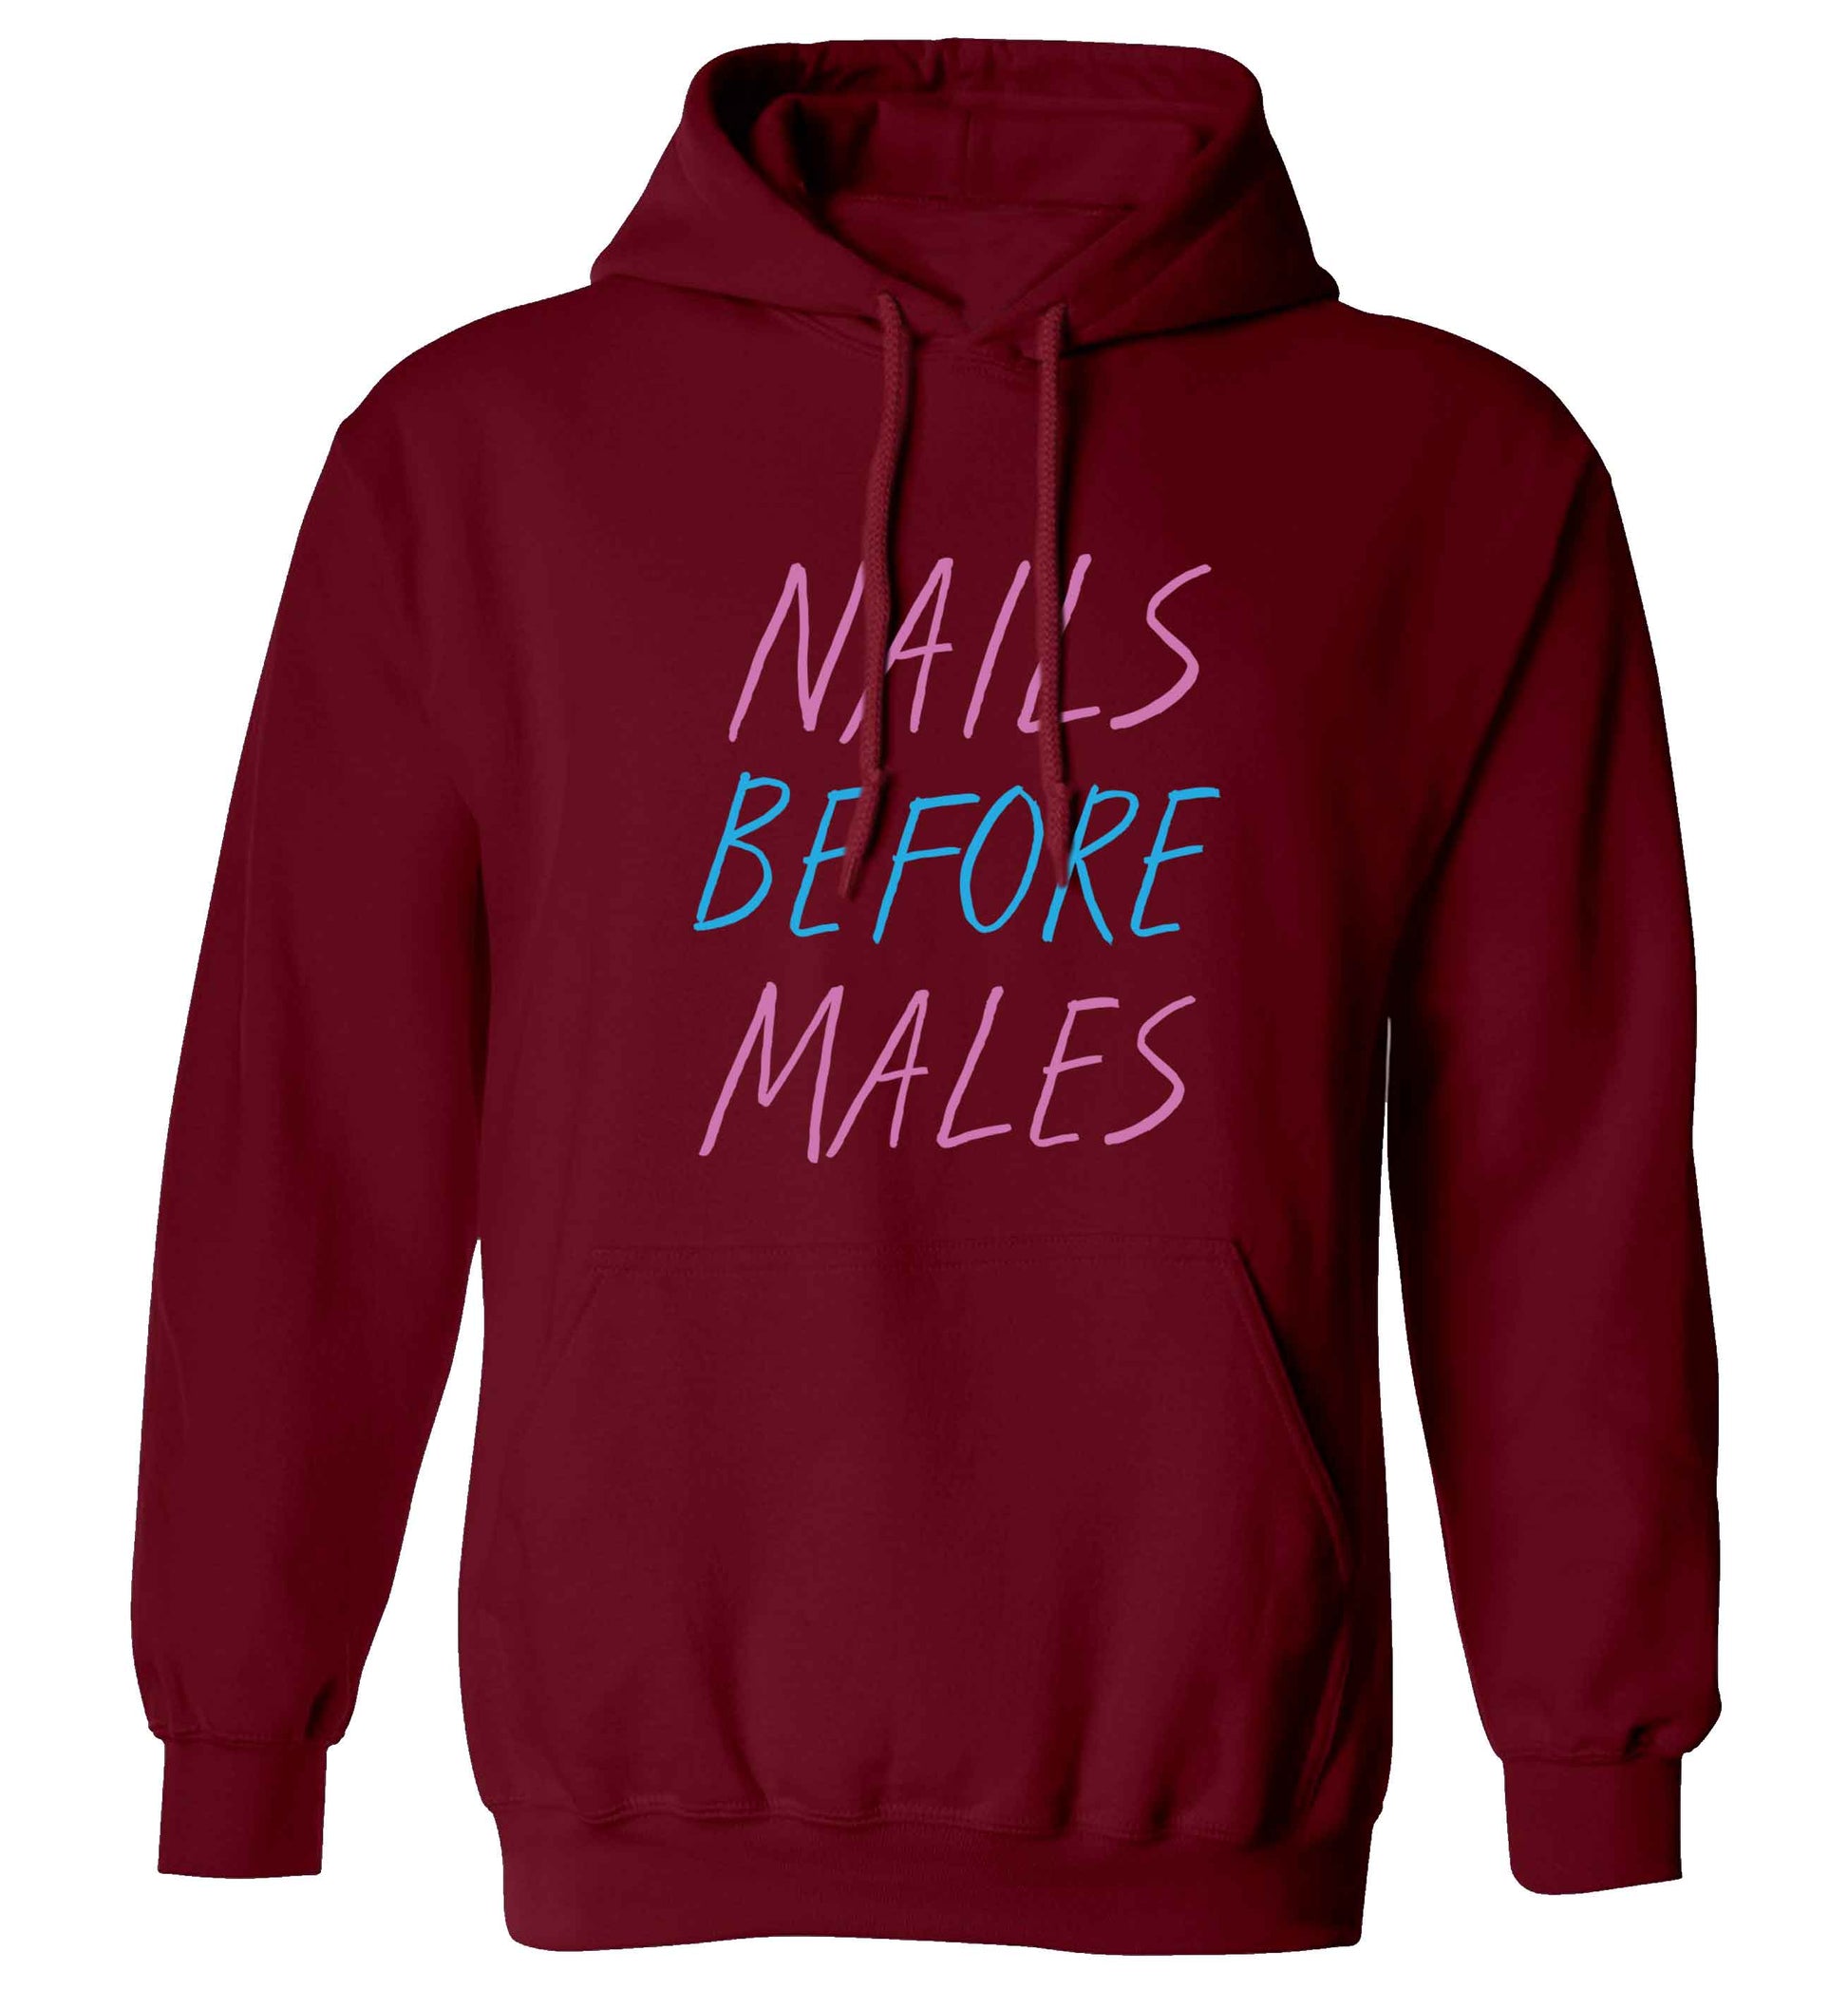 Nails before males adults unisex maroon hoodie 2XL